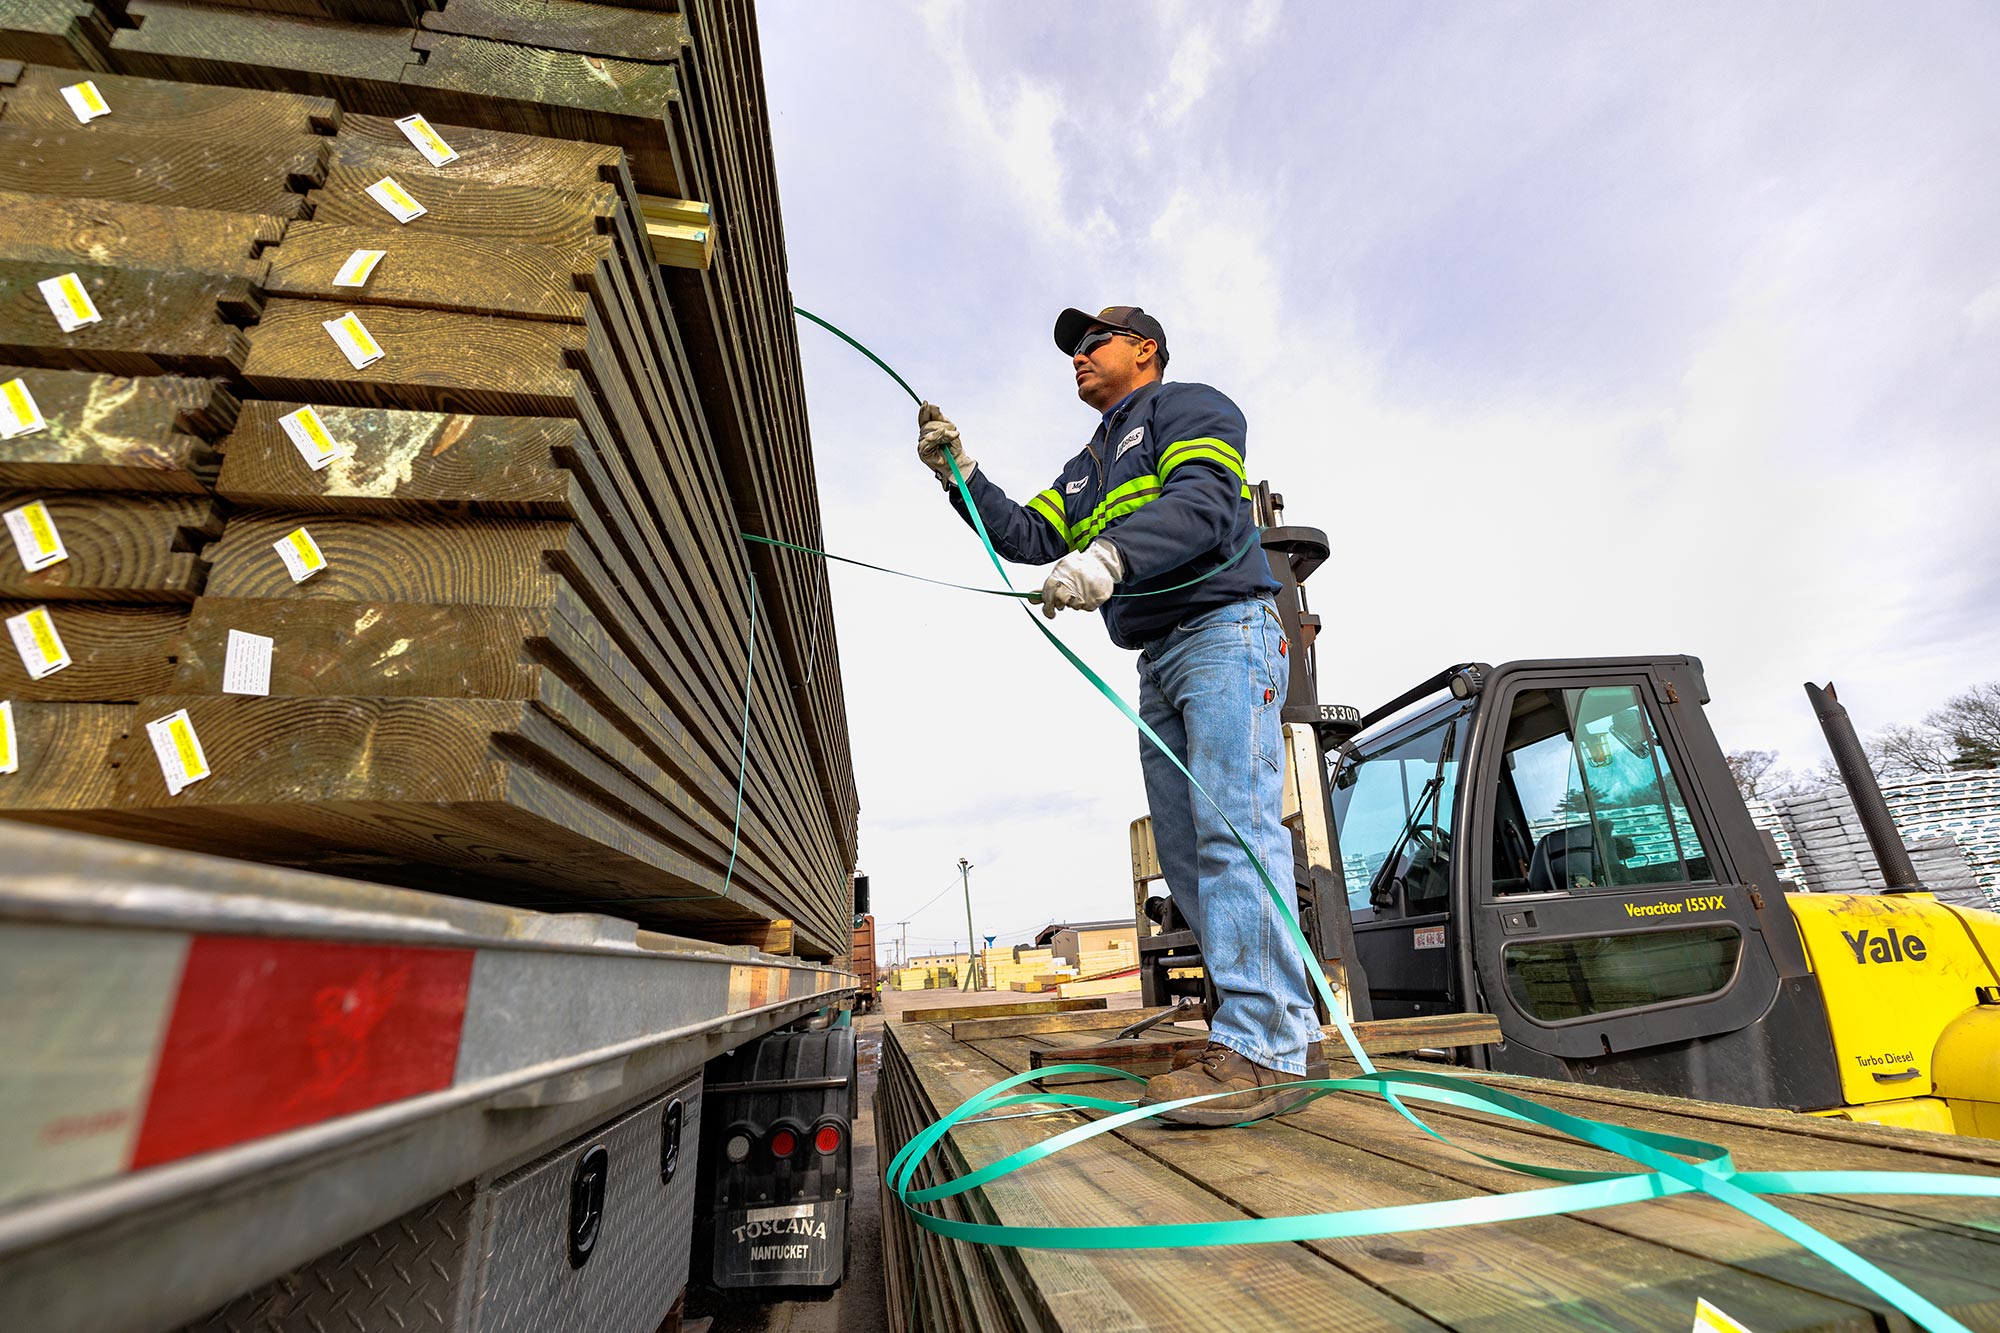 Treated Lumber Products | BB&S Lumber worker securing treated lumber on train | BB&S Lumber